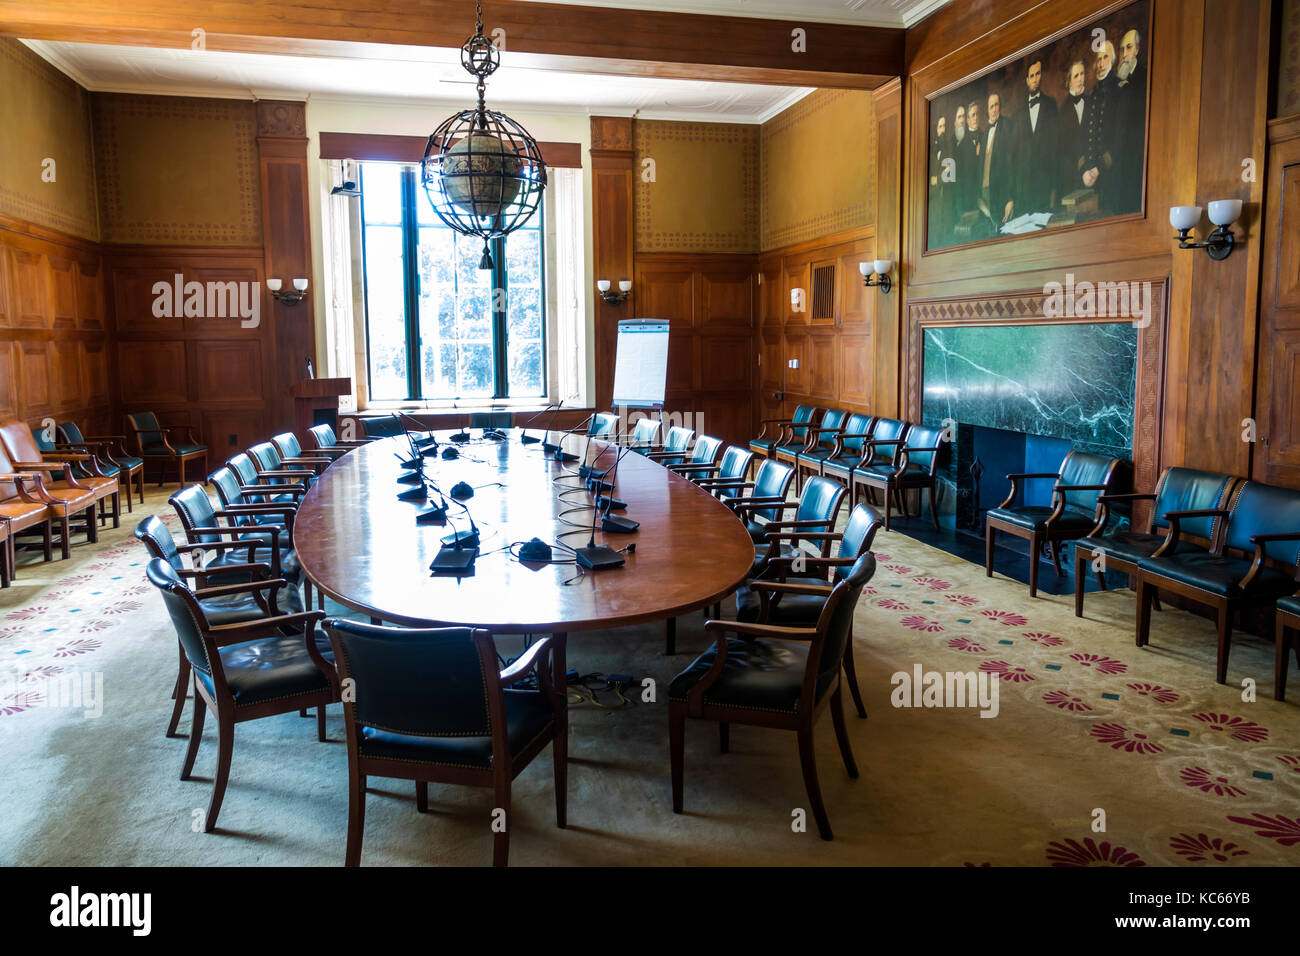 Washington DC,National Mall,National Academy of Science,NAS,Boardroom,conference table,Founders' Portrait,Albert Herter,interior inside,DC170527047 Stock Photo